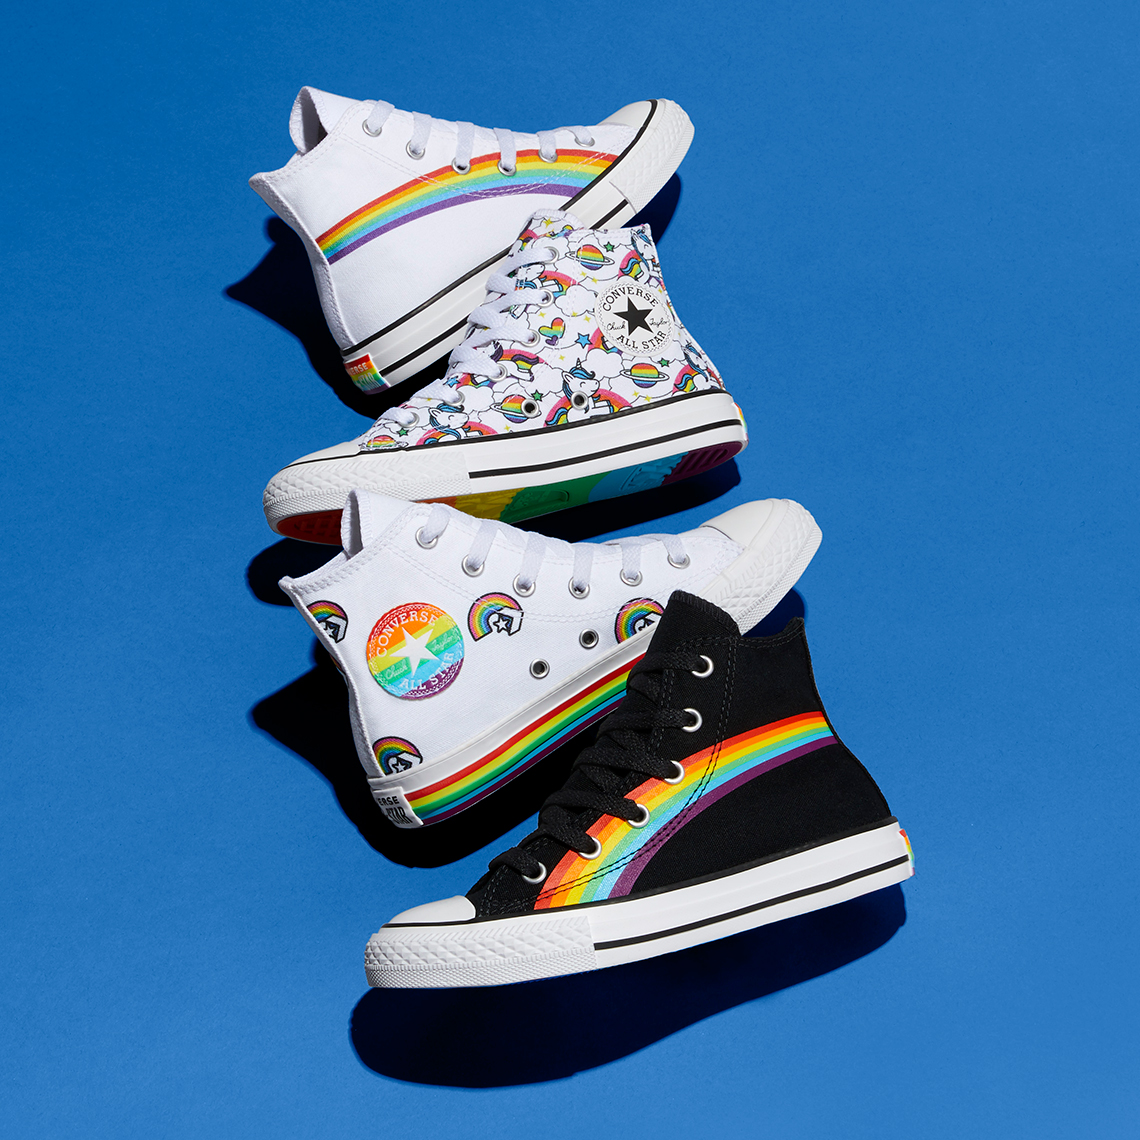 Converse 2020 Collection Release Date SneakerNews.com